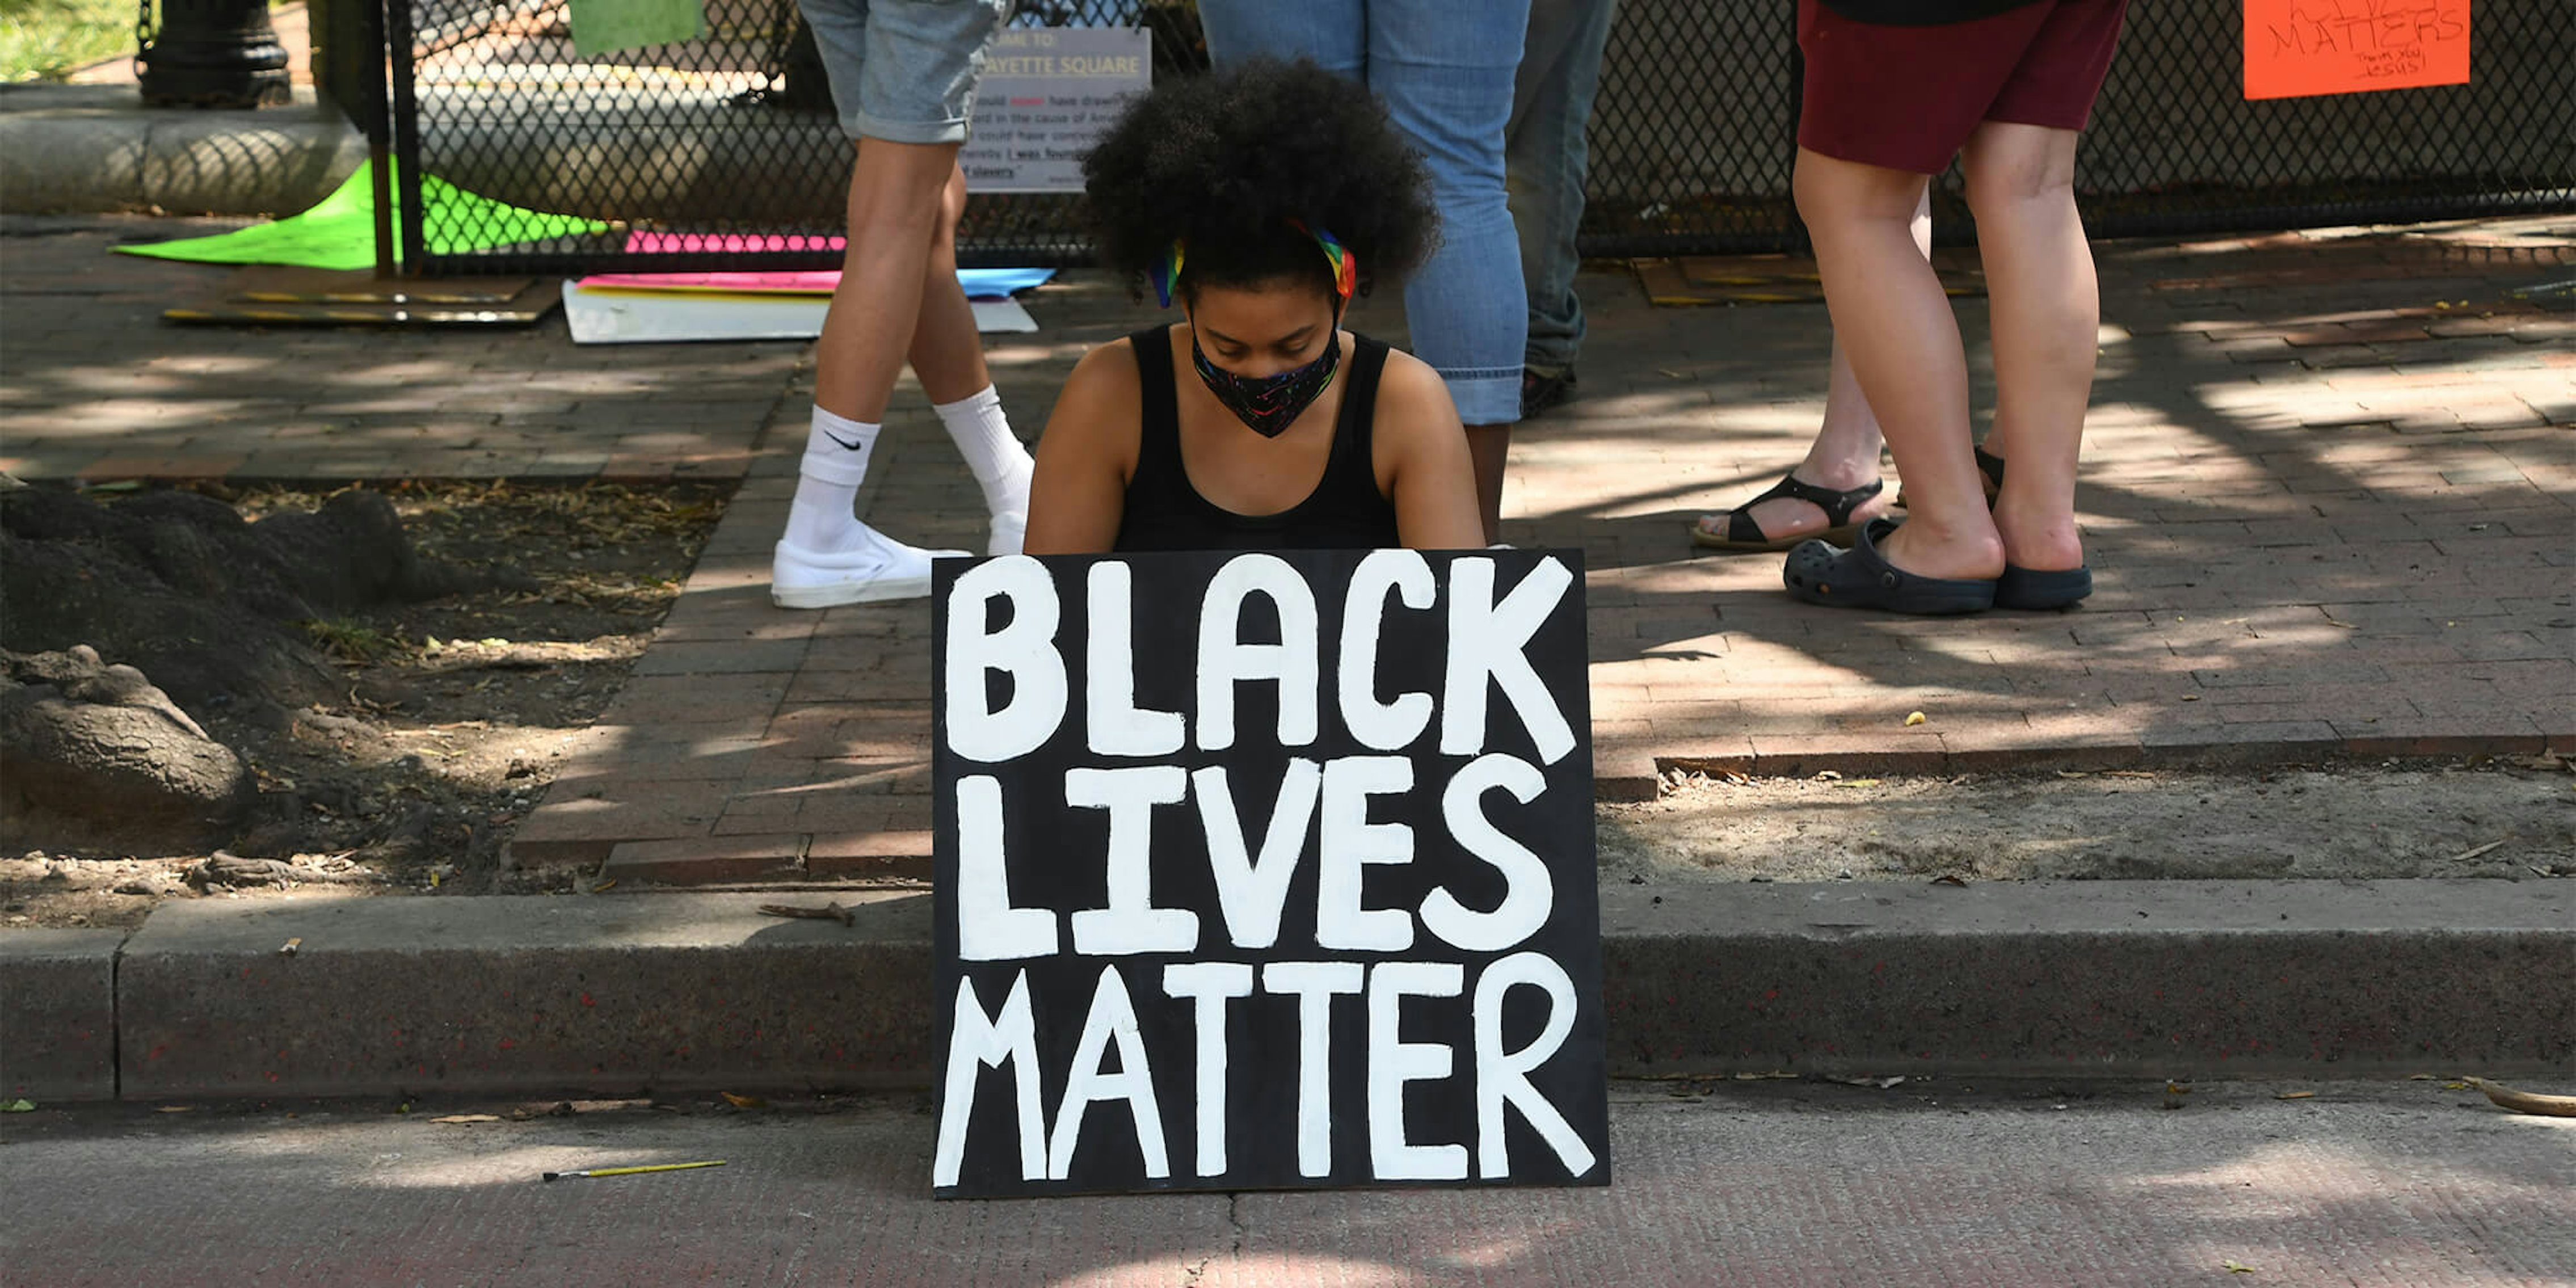 woman sitting on curb holding a Black Lives Matter sign, wearing a facemask